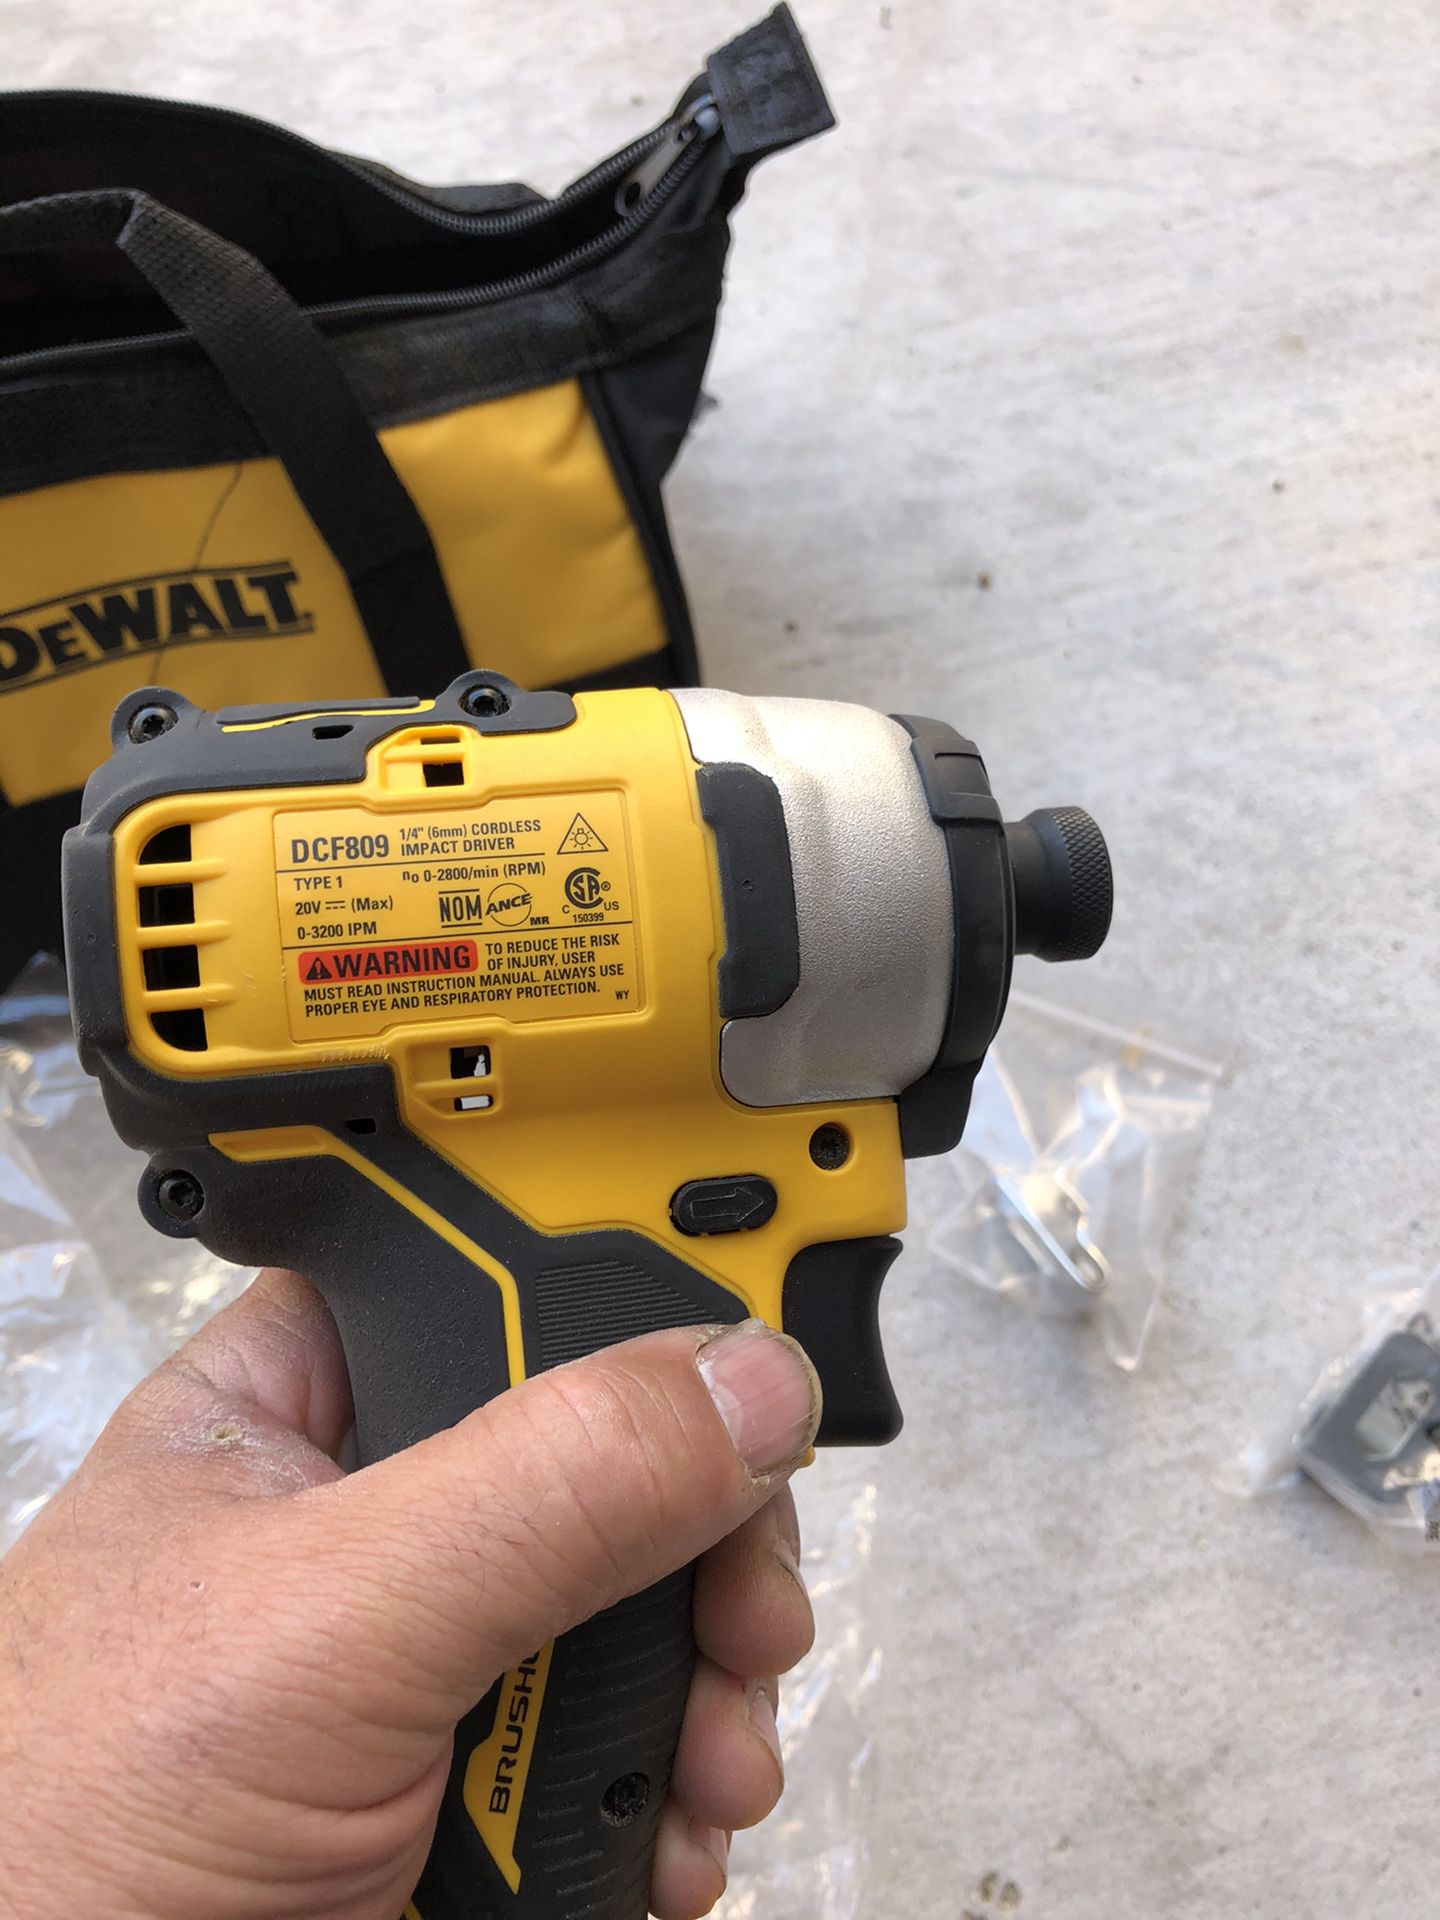 Dewalt compact drill and impact.